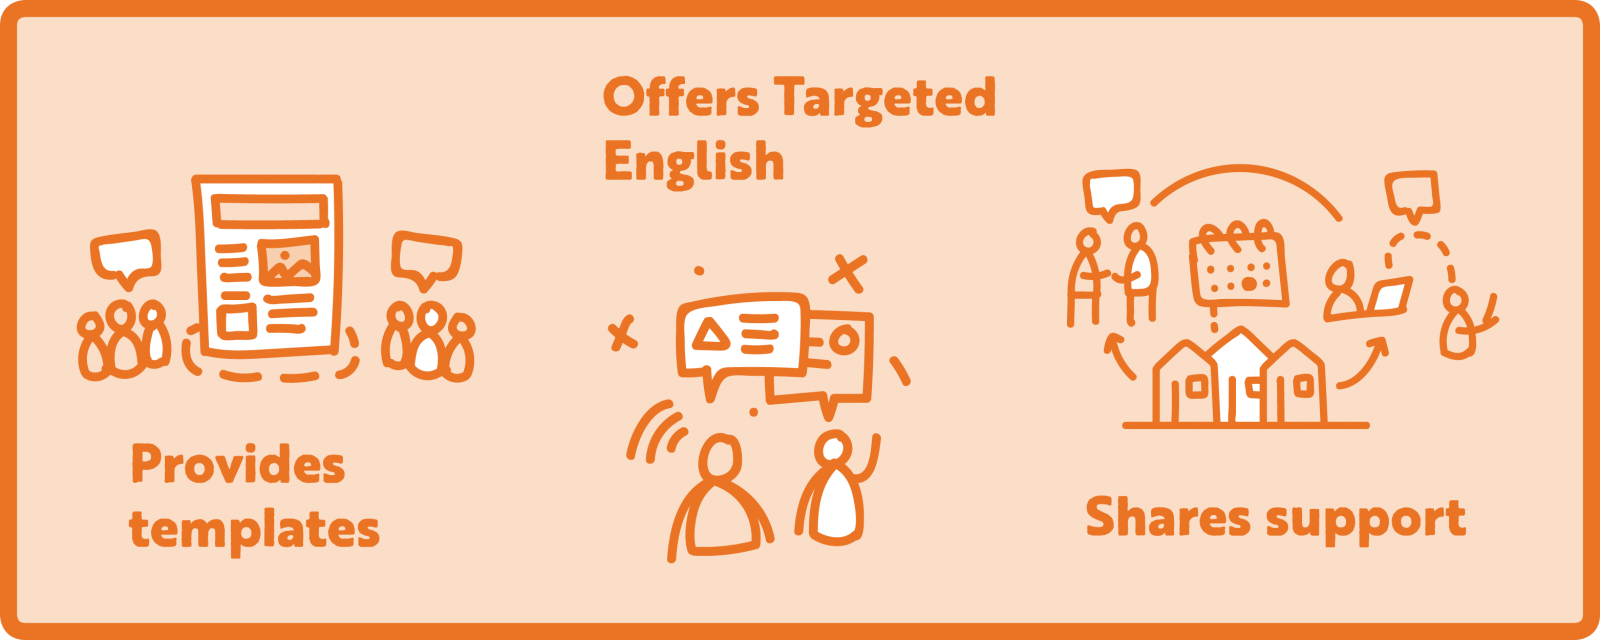 Provides templates - Offers targeted English – Shares support